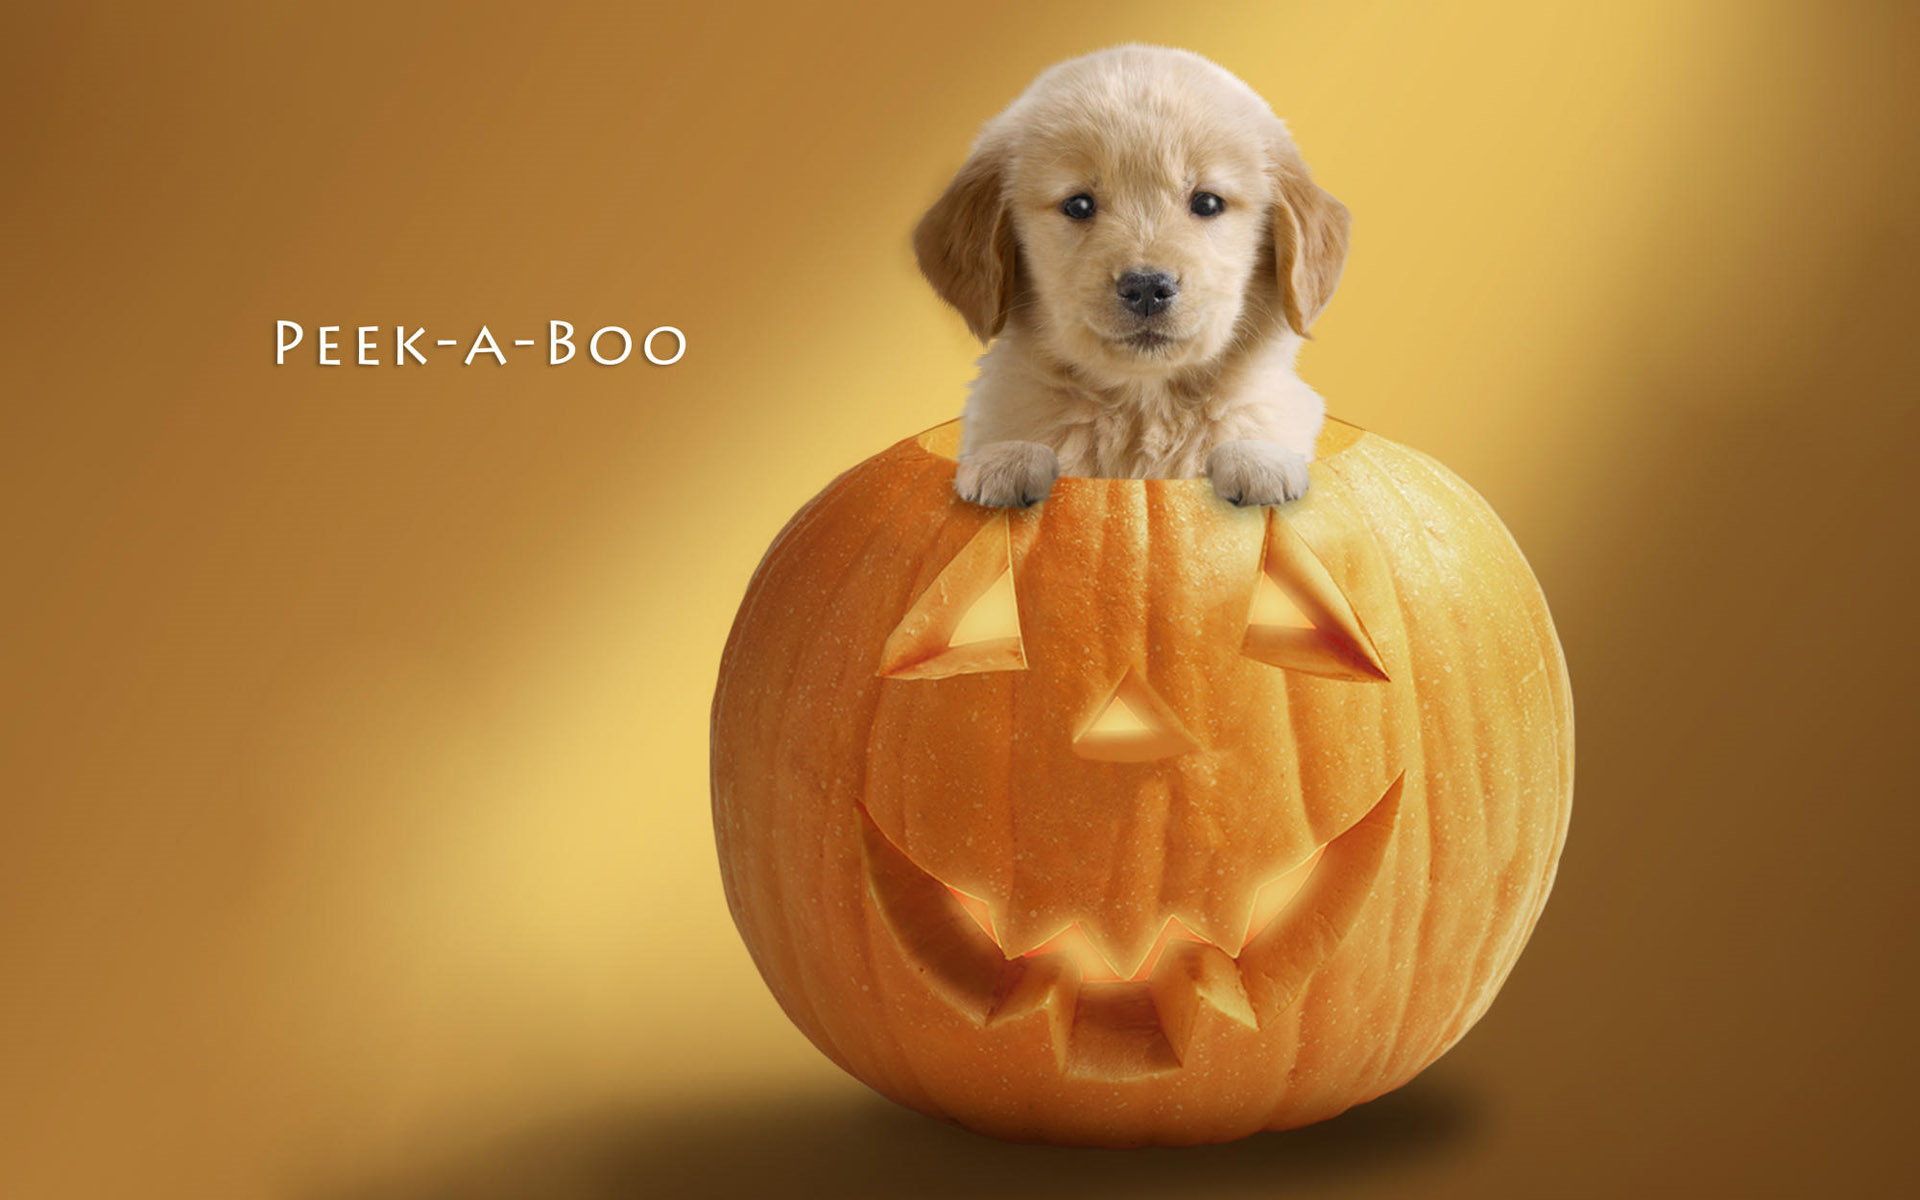 A cute puppy in a carved pumpkin with the text 